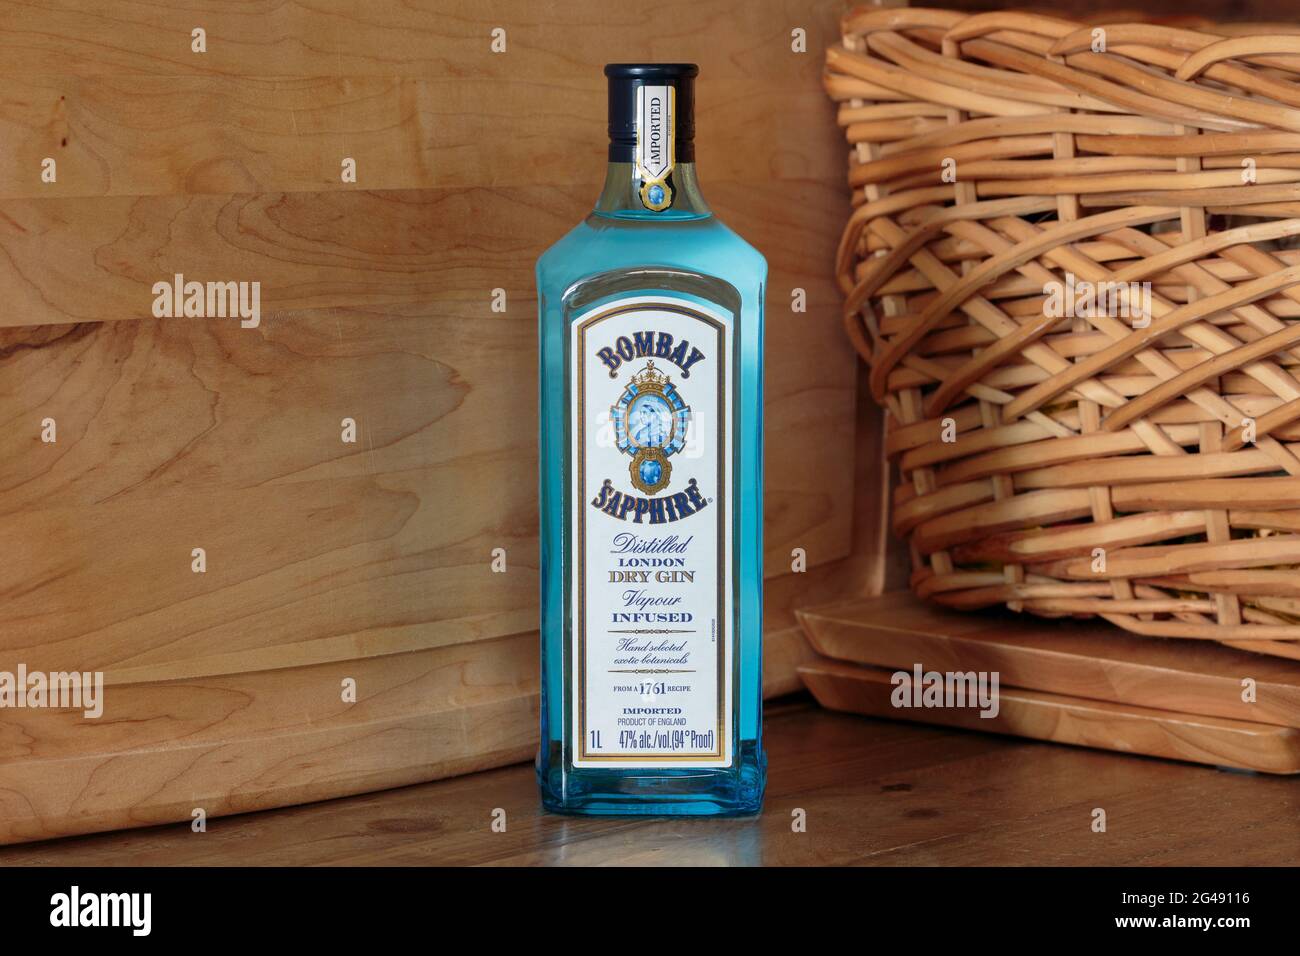 bottle of Bombay Sapphire distilled london dry gin, and English vapour infused gin Stock Photo